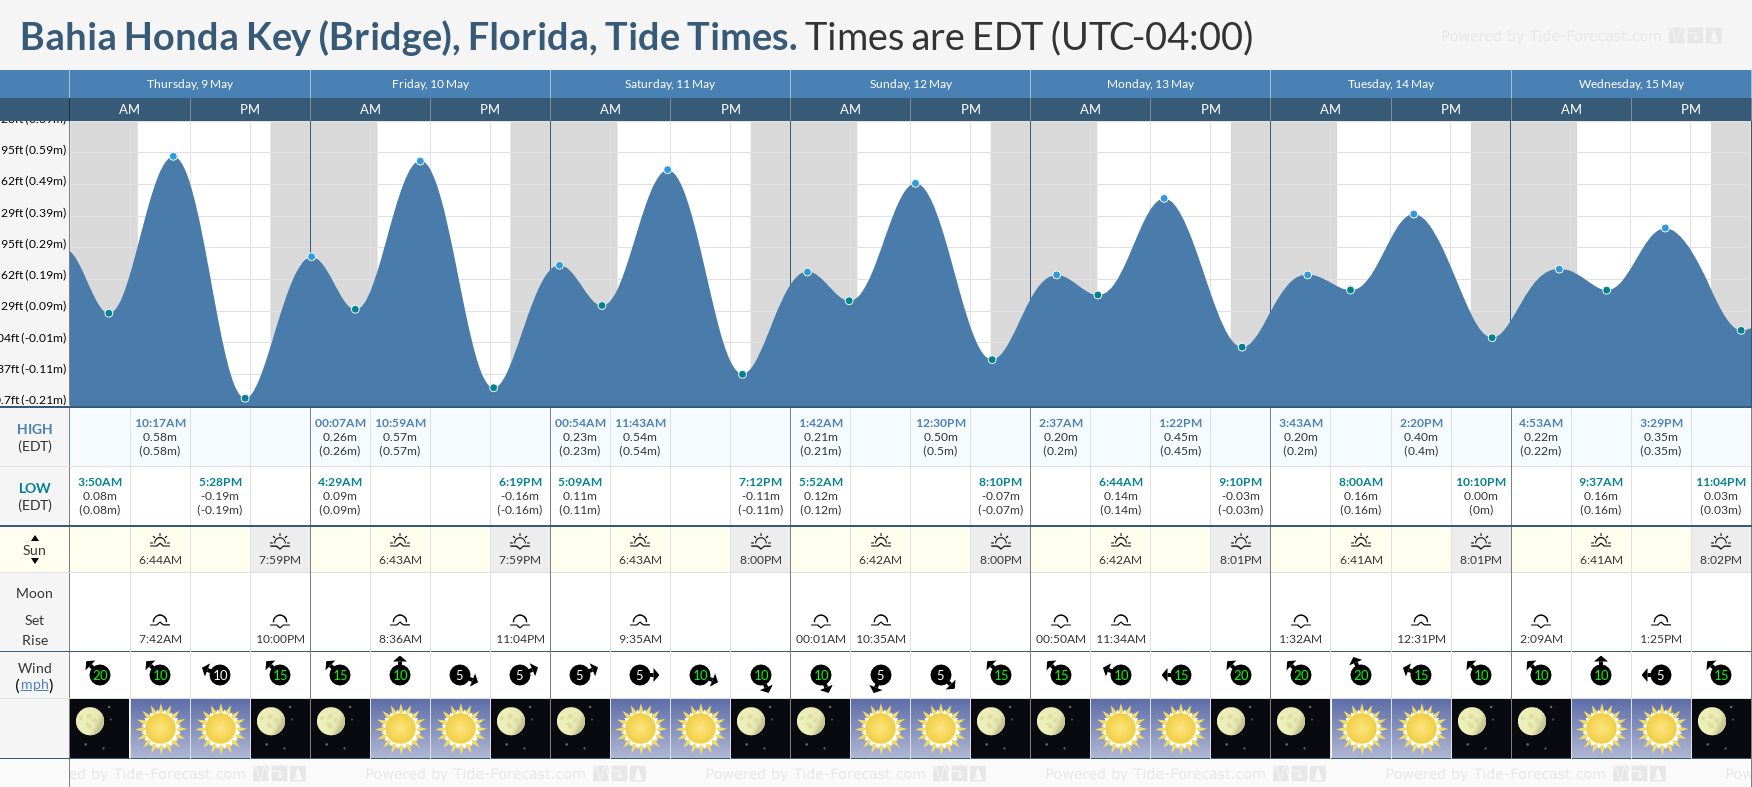 Bahia Honda Key (Bridge), Florida Tide Chart including high and low tide tide times for the next 7 days